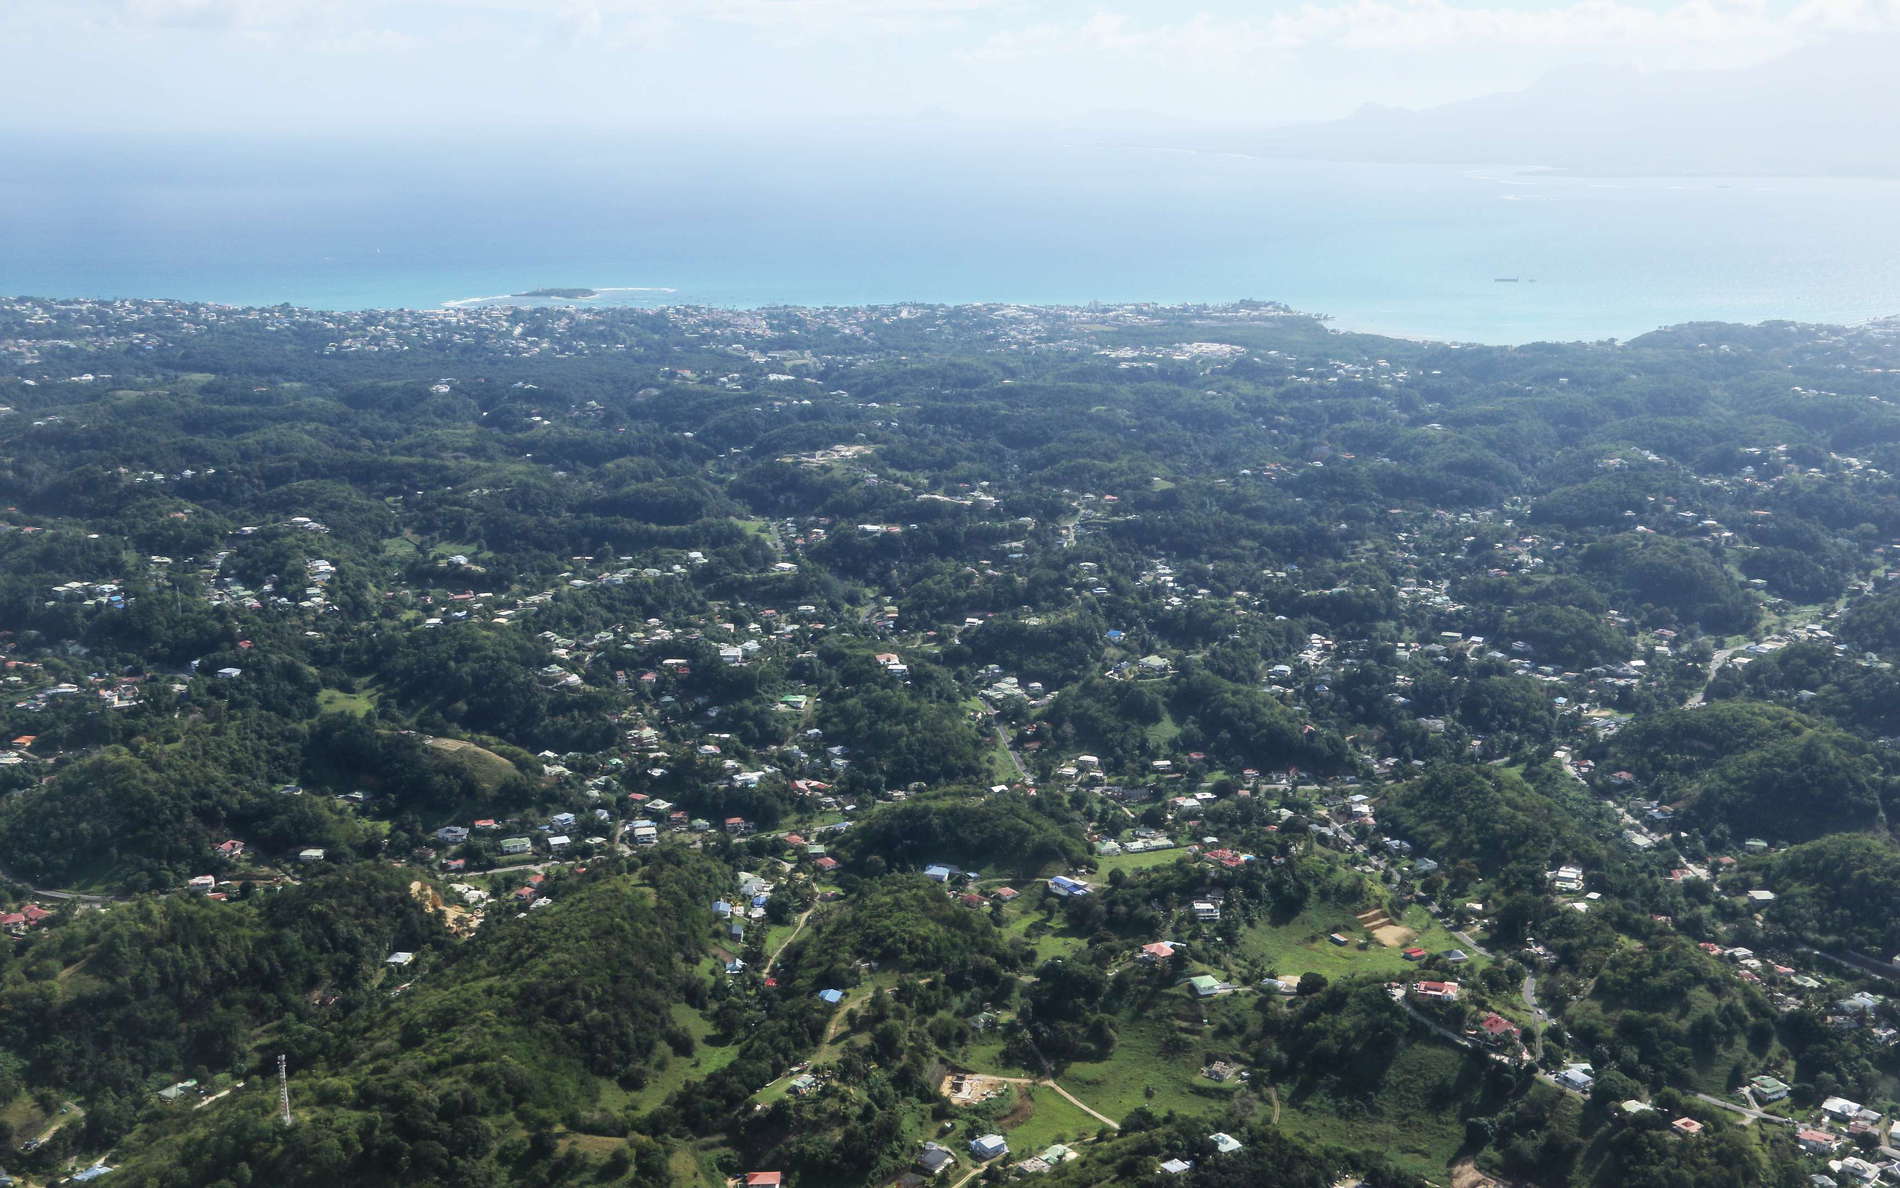 Guadeloupe | Grande-Terre with karst features